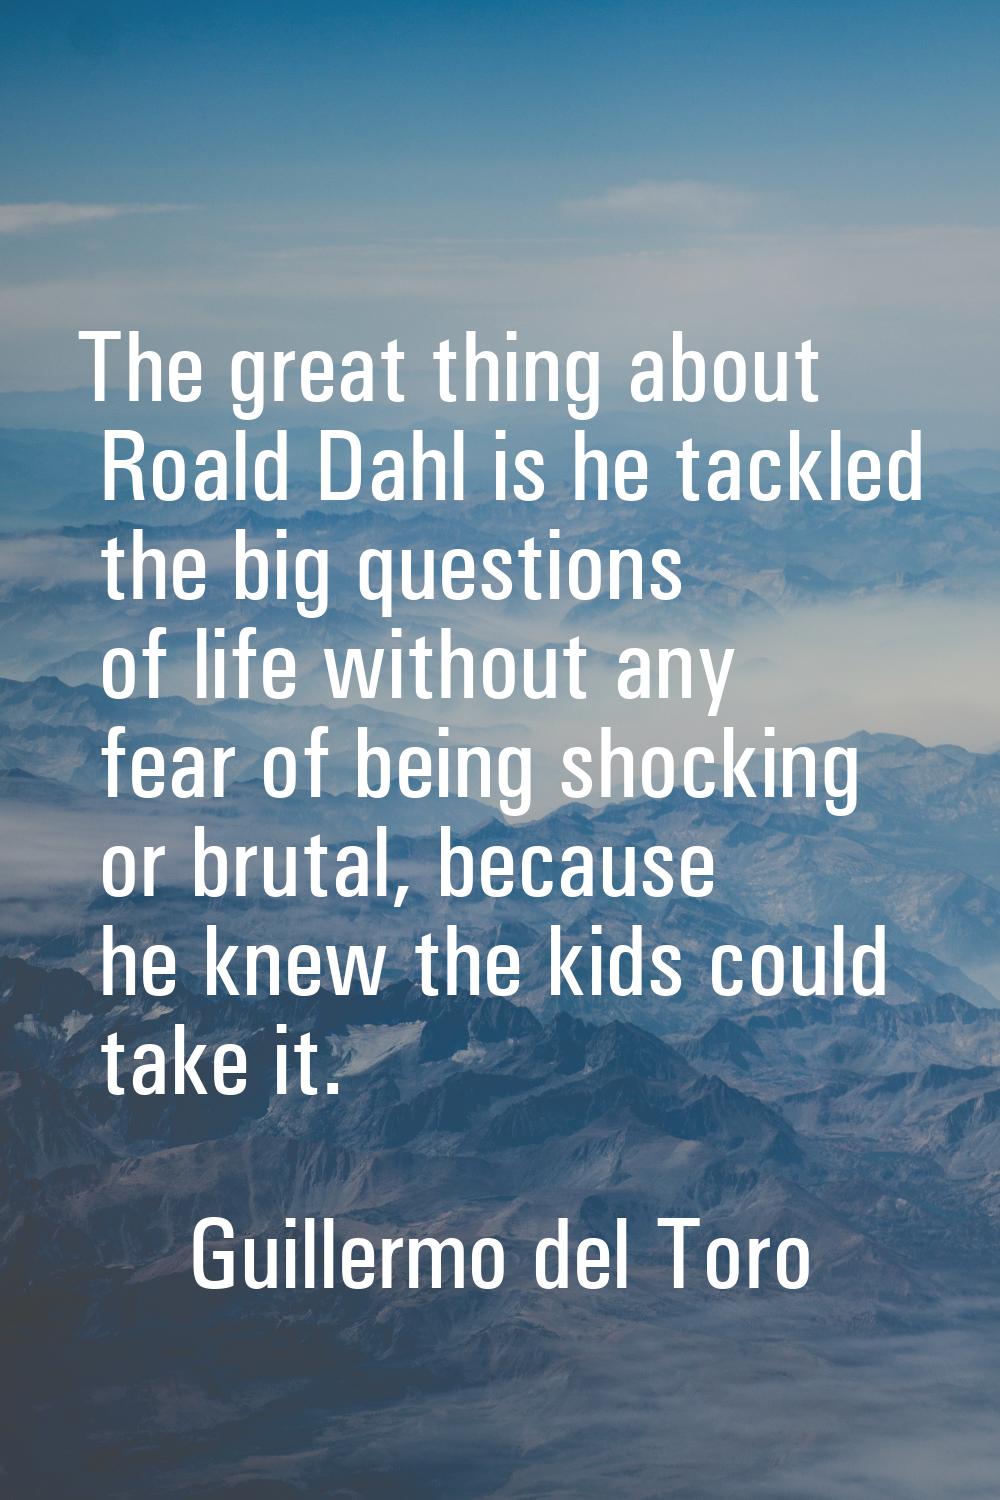 The great thing about Roald Dahl is he tackled the big questions of life without any fear of being 